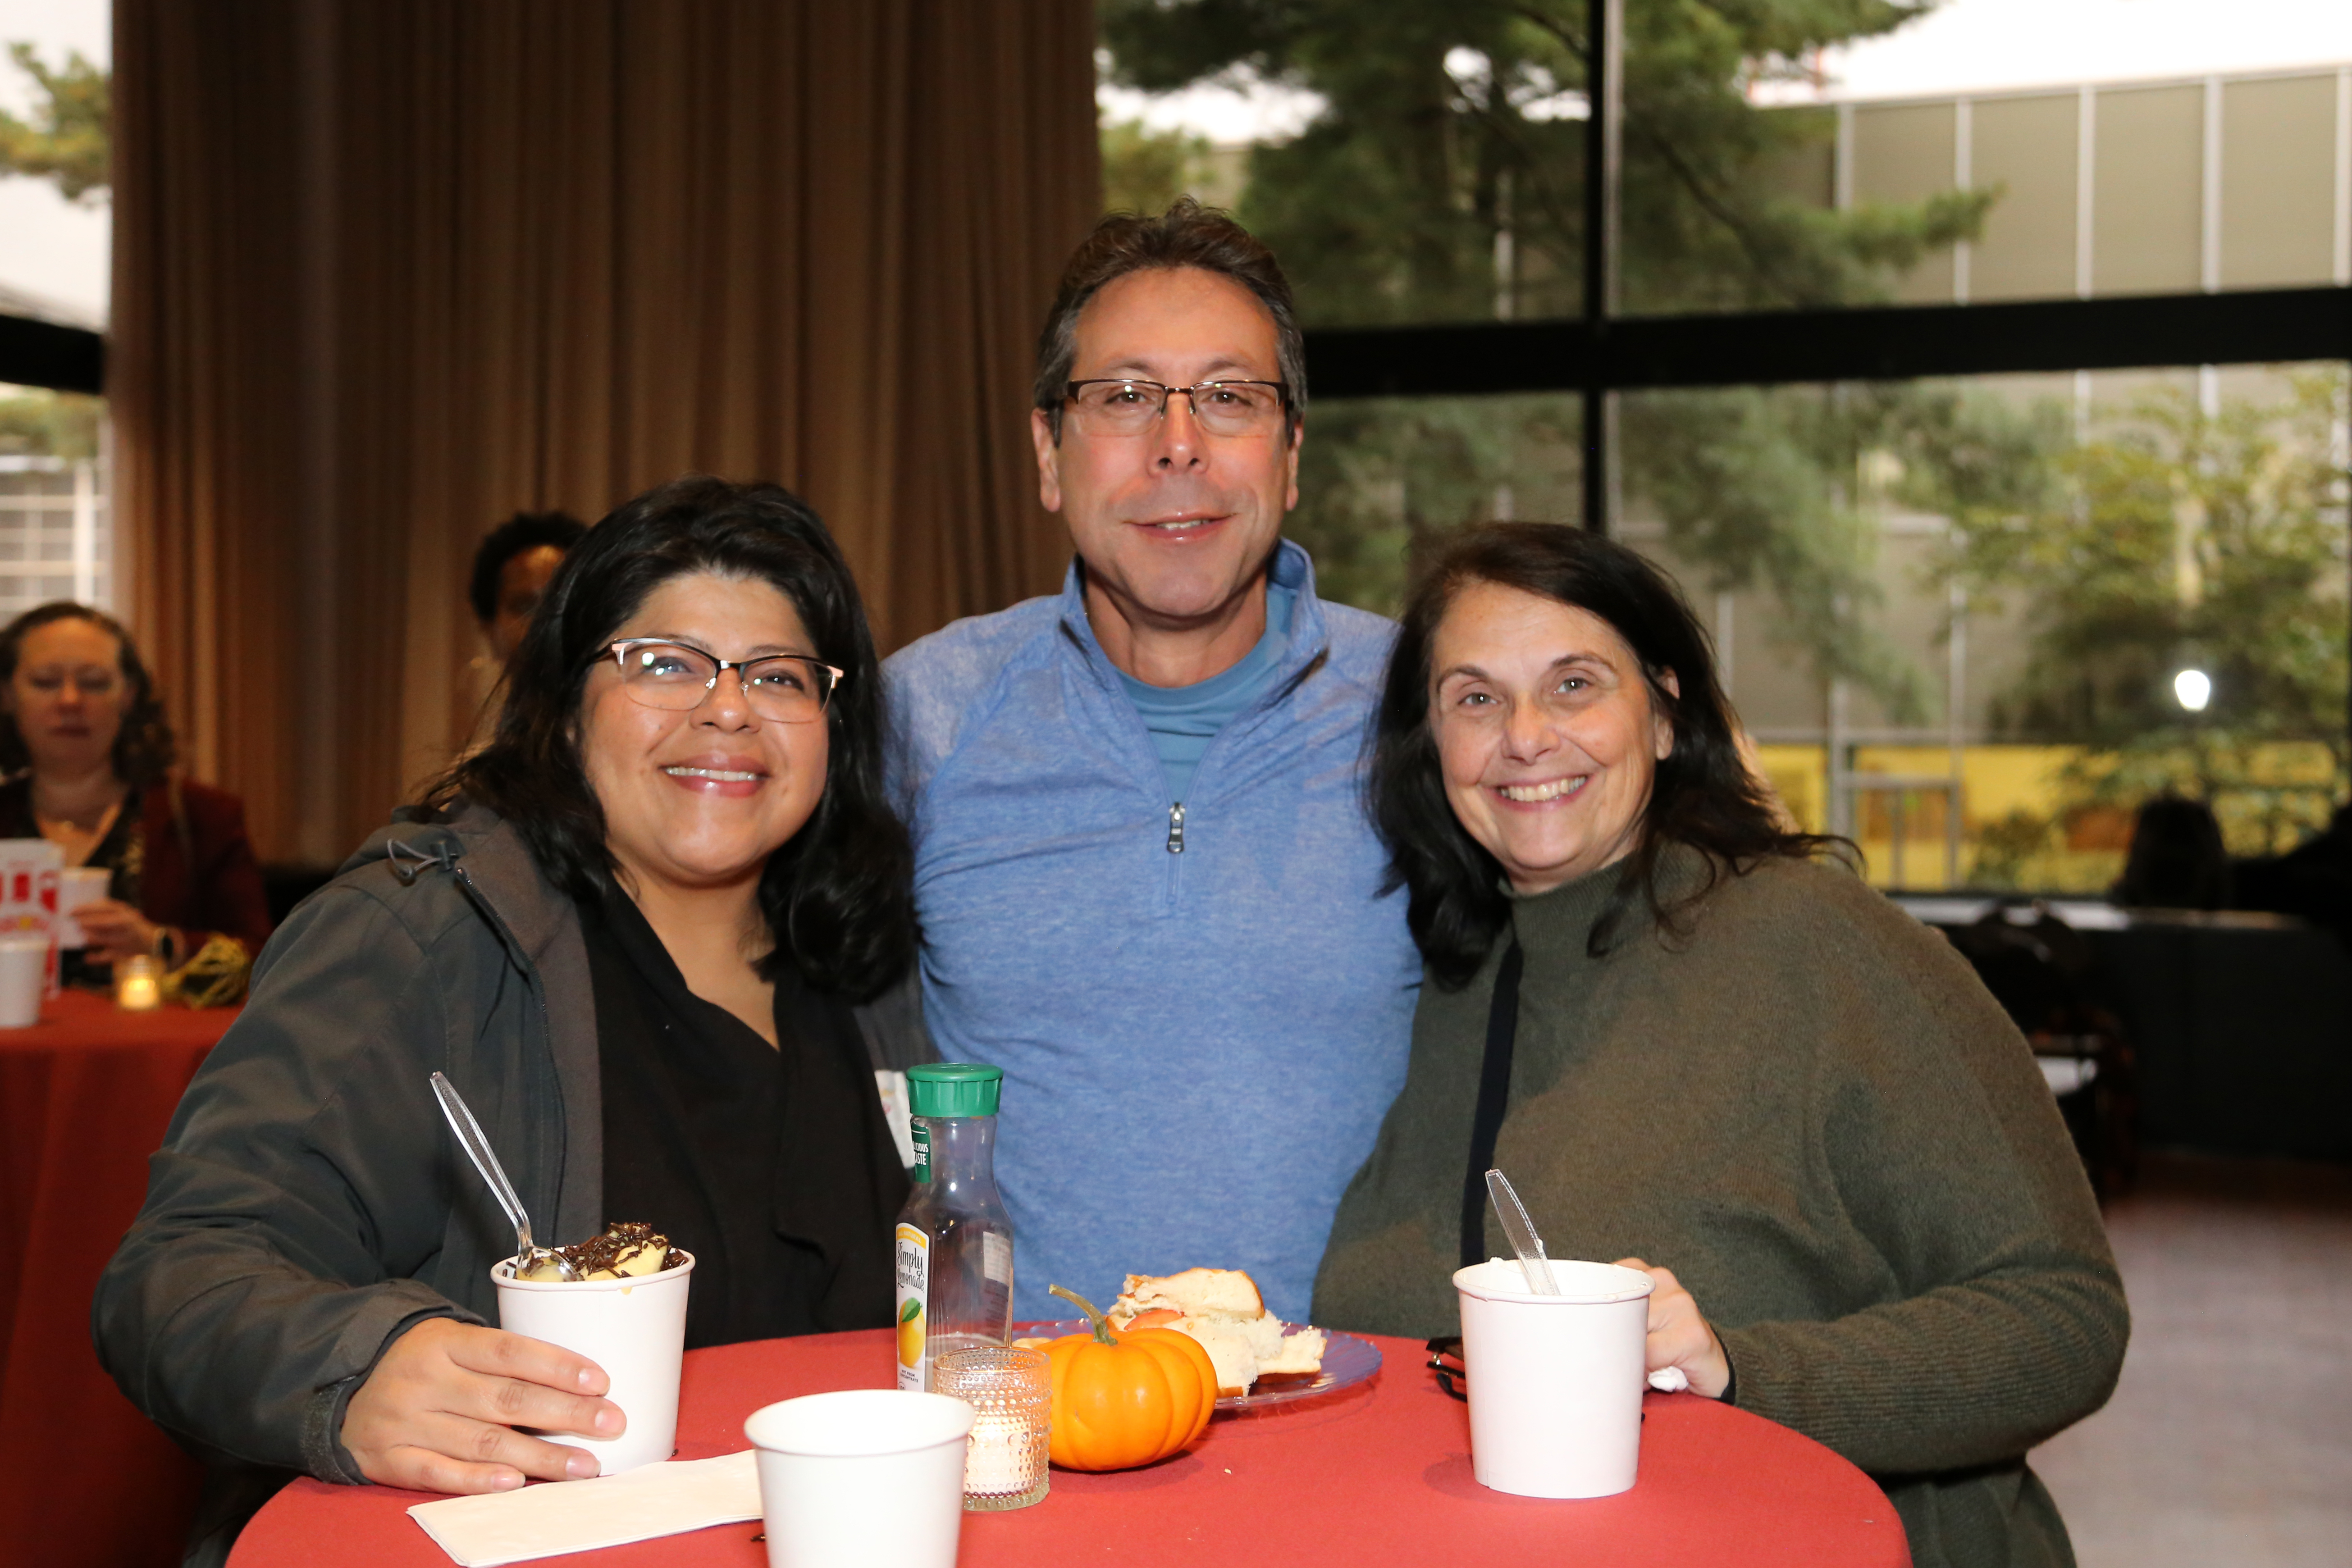 Ana Ludwig, Erminia Piccinonno, and a Fall Fair attendee in a blue Oxford shirt and glasses at a table